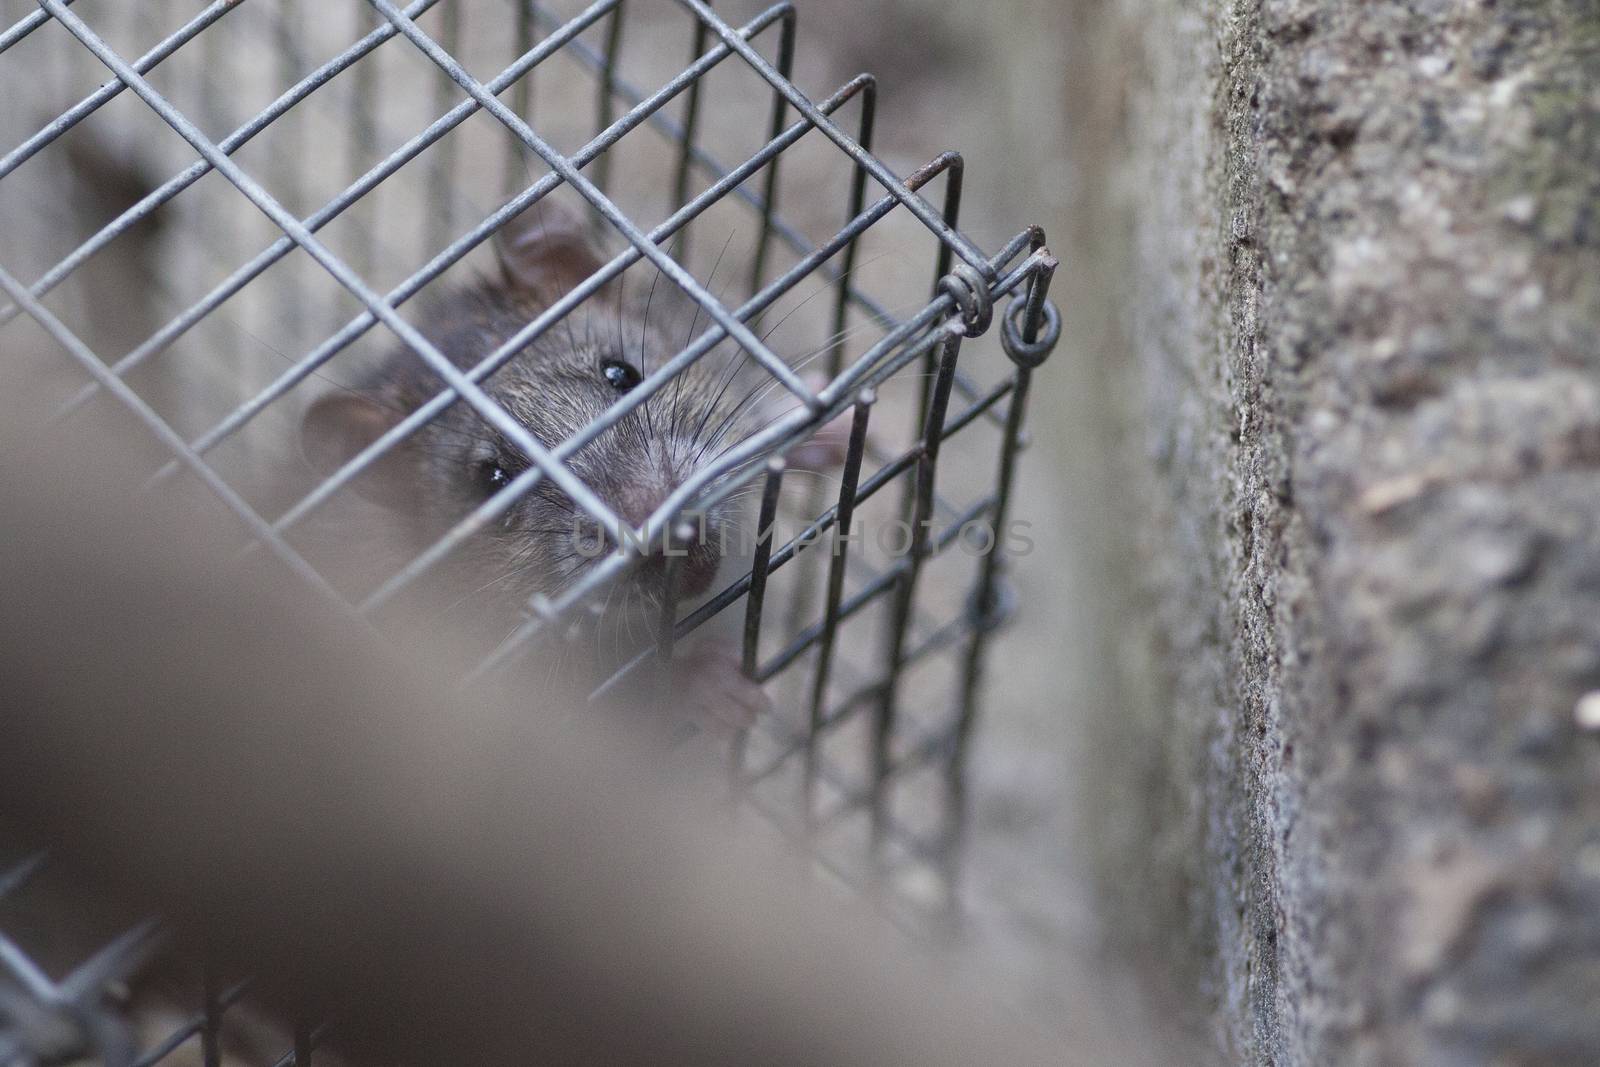 Rat in a cage #4 by pippocarlot